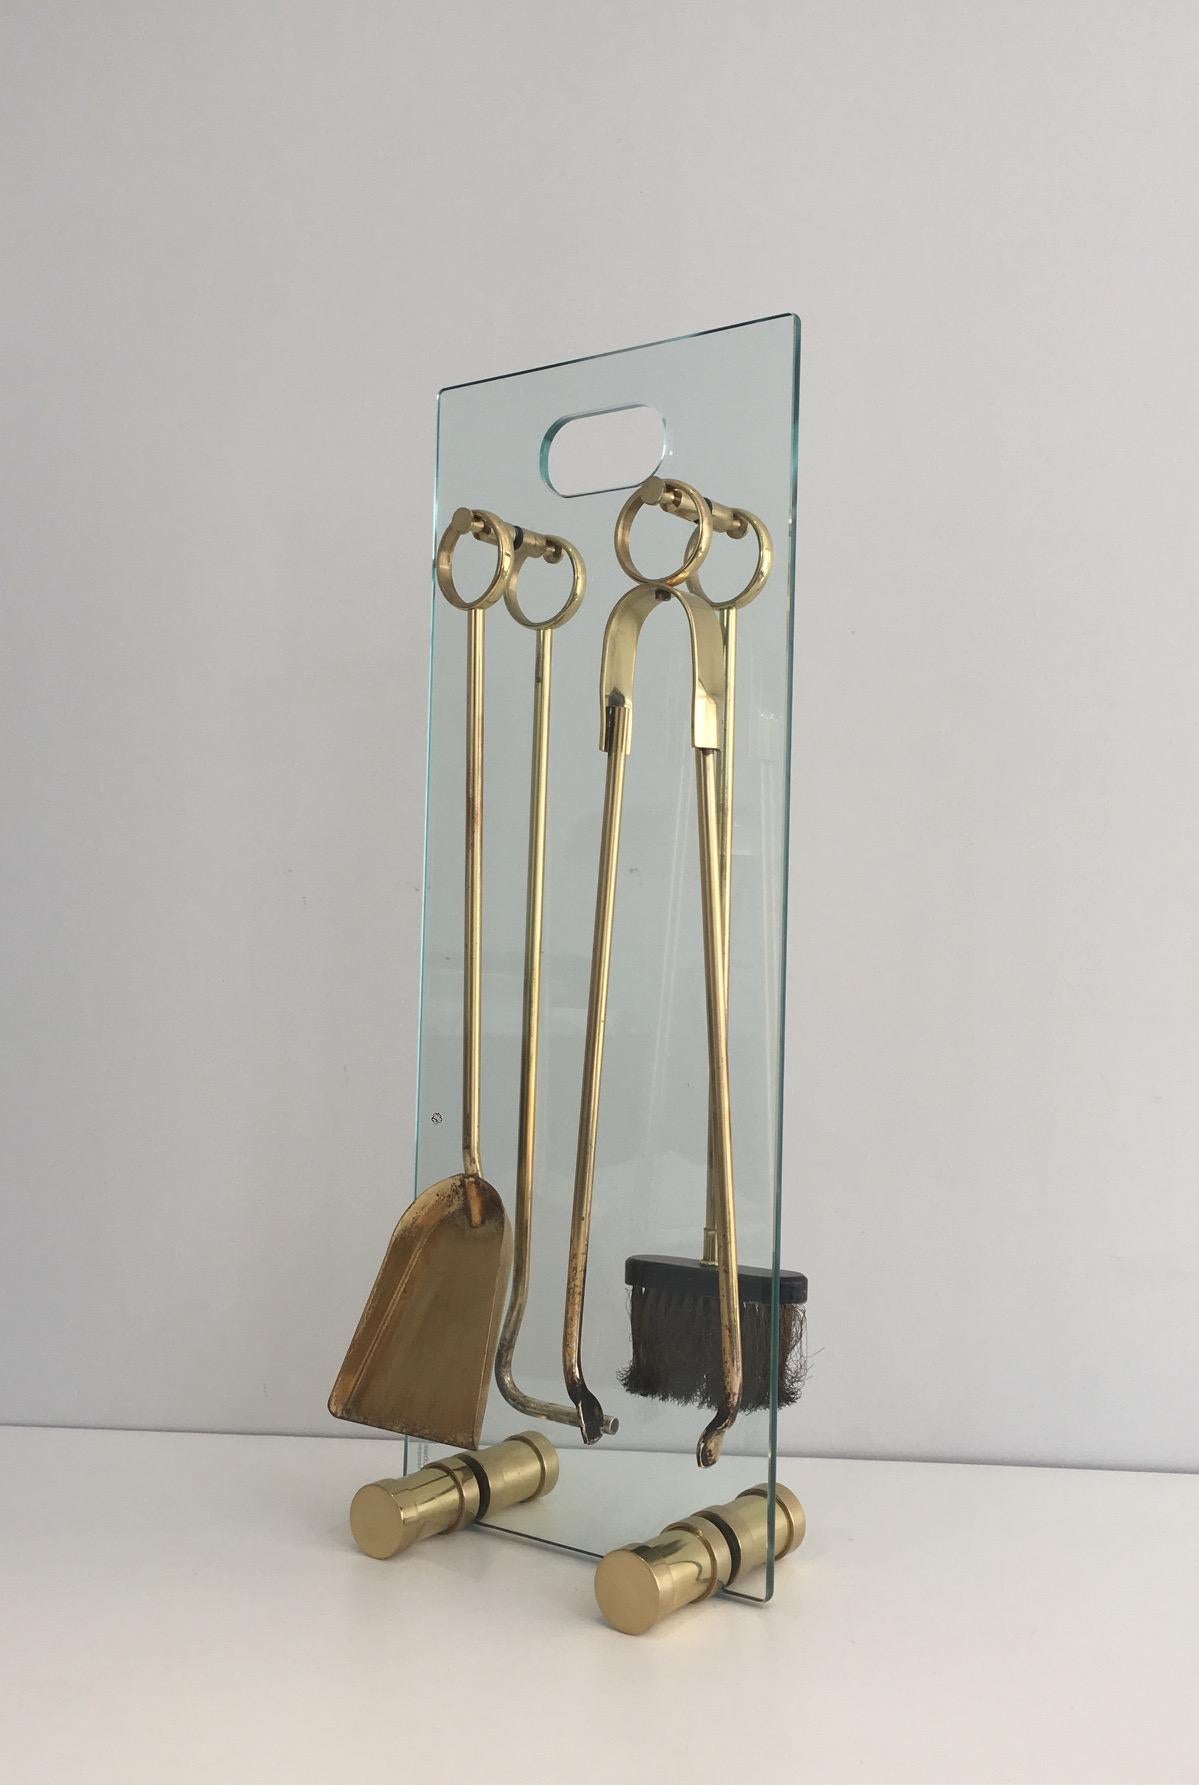 This nice fire place tools are made of brass and are displayed on a tempered glass and brass base, French, circa 1970.